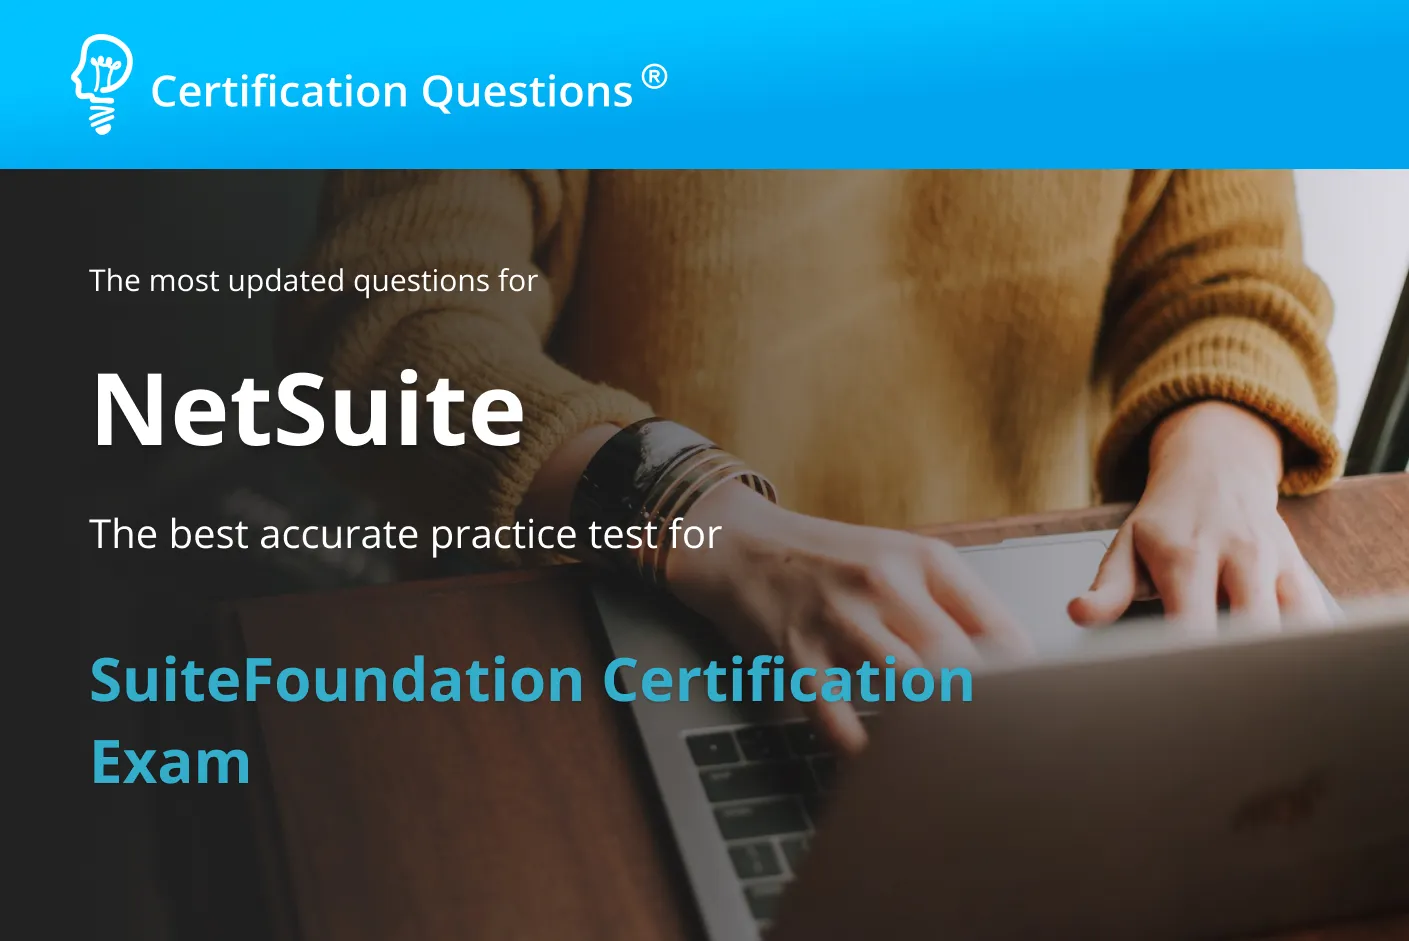 This image is related to Netsuite Certification Administrator Exam Preparation